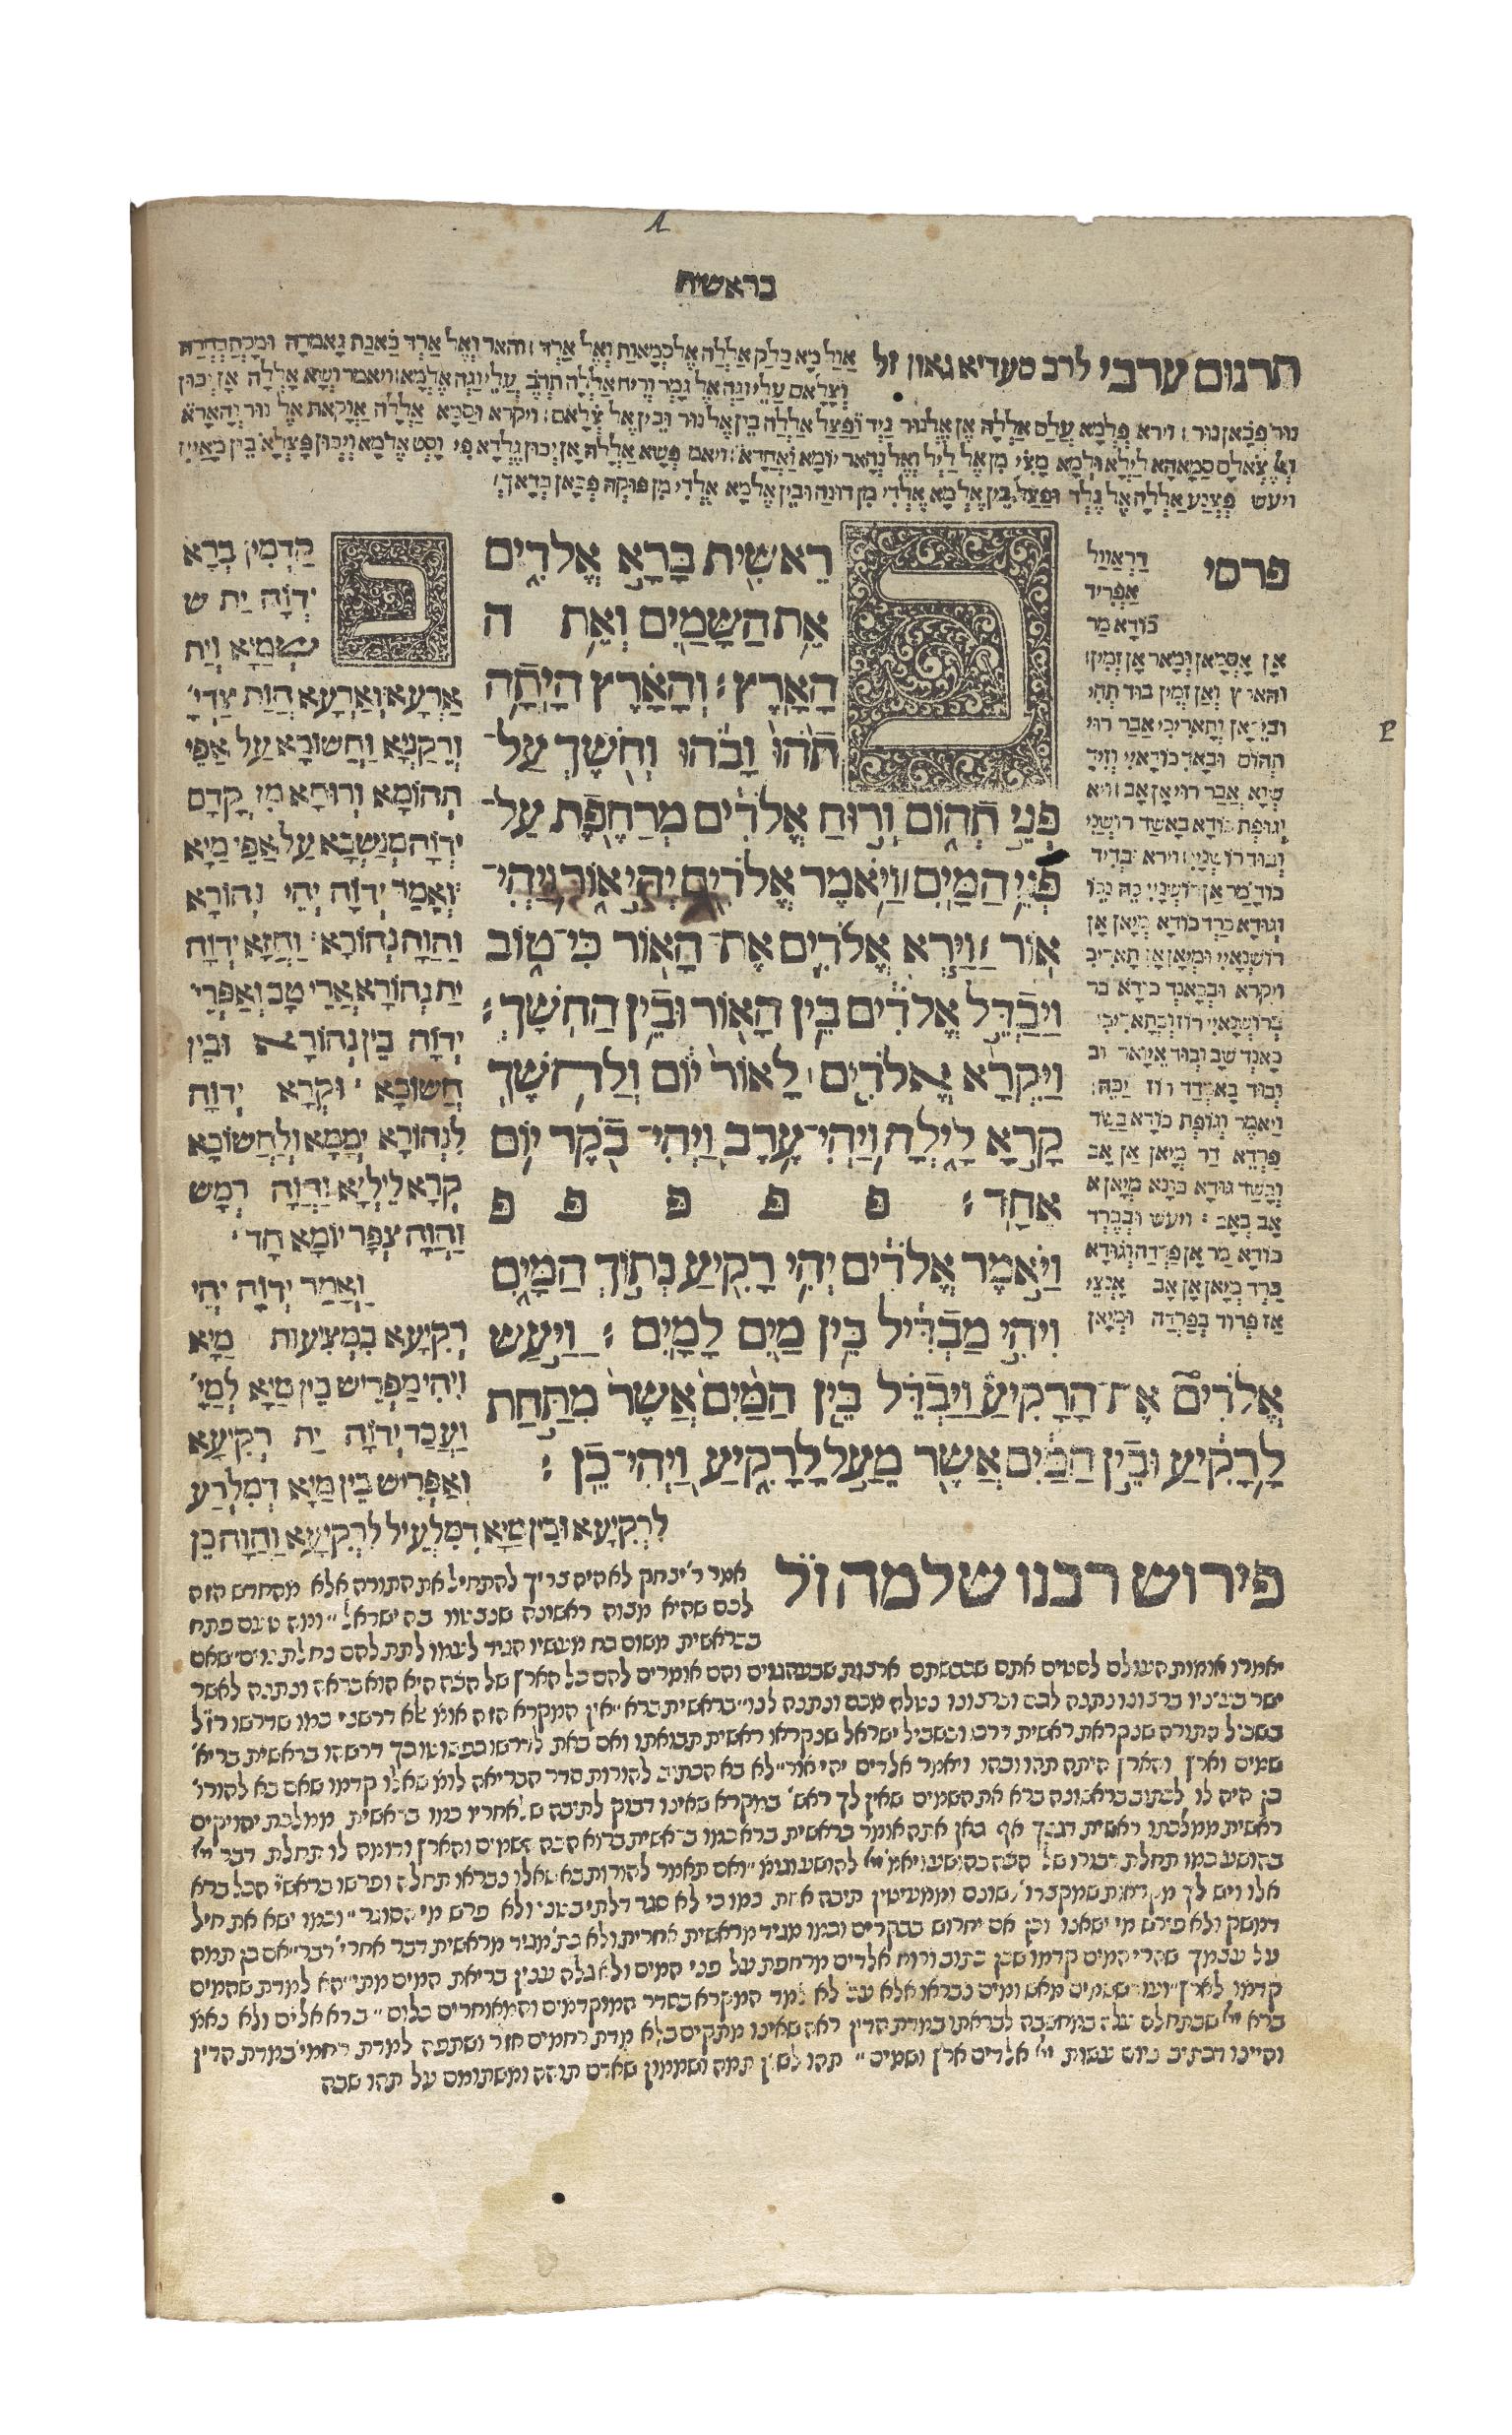 Printed page with four different texts in Hebrew, Judeo-Persian, Judeo-Arabic, and Aramaic arranged in columns vertically and horizontally.